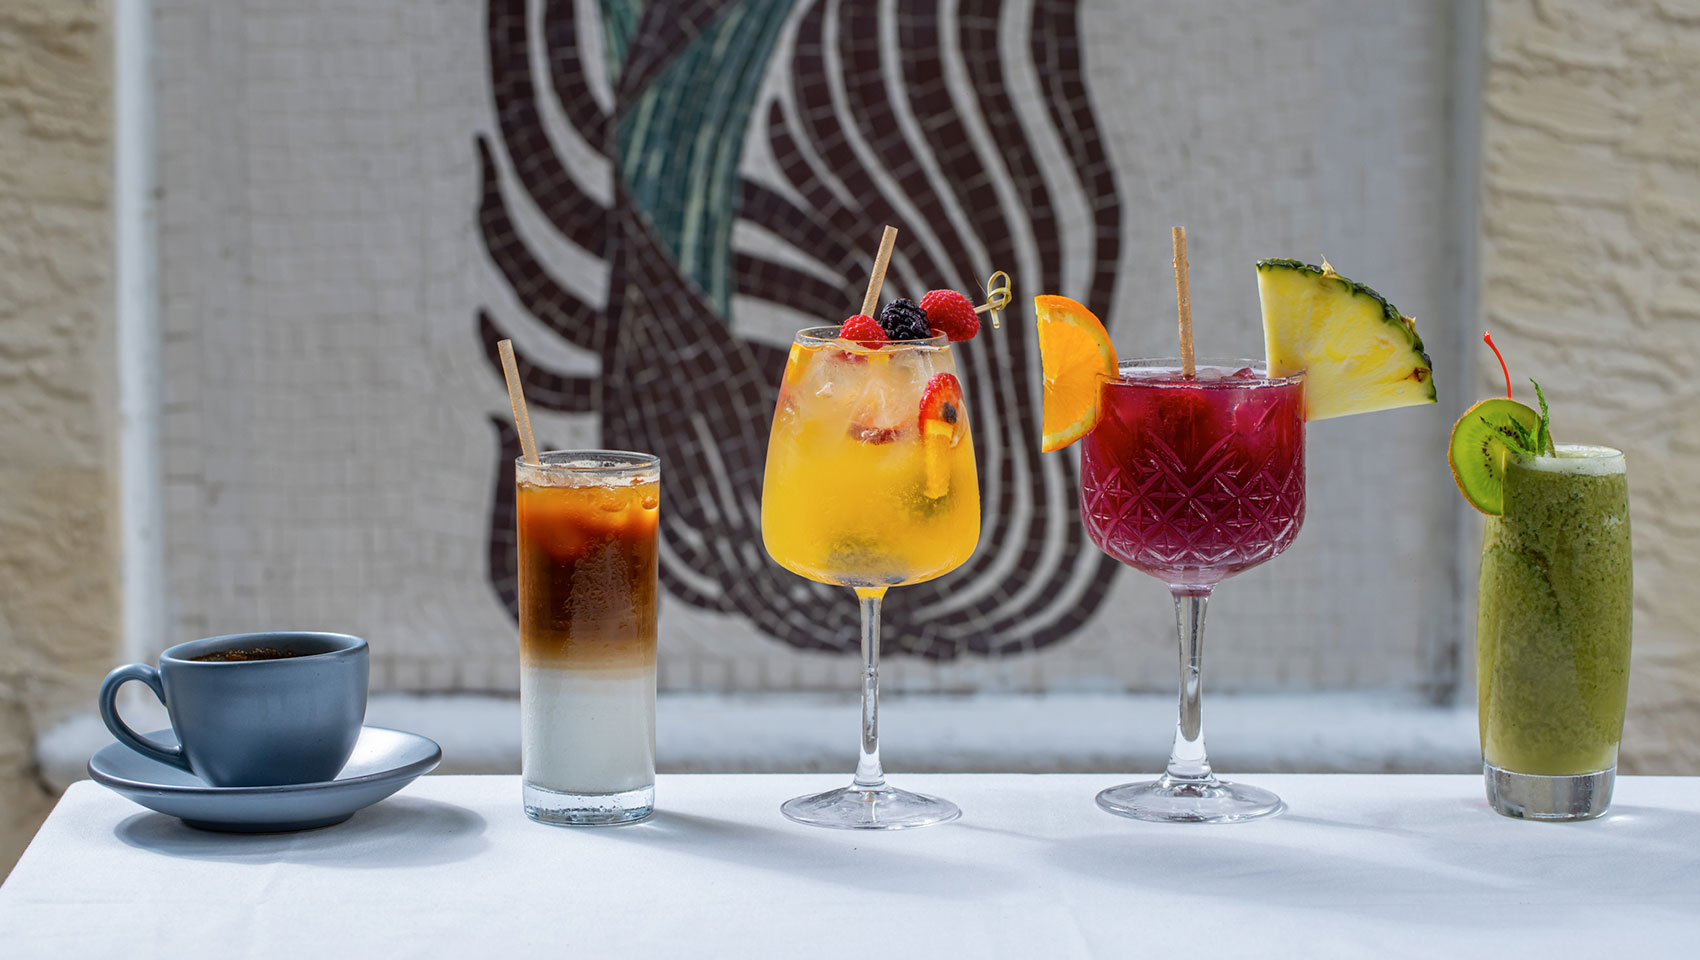 Image of cocktails from El Patio